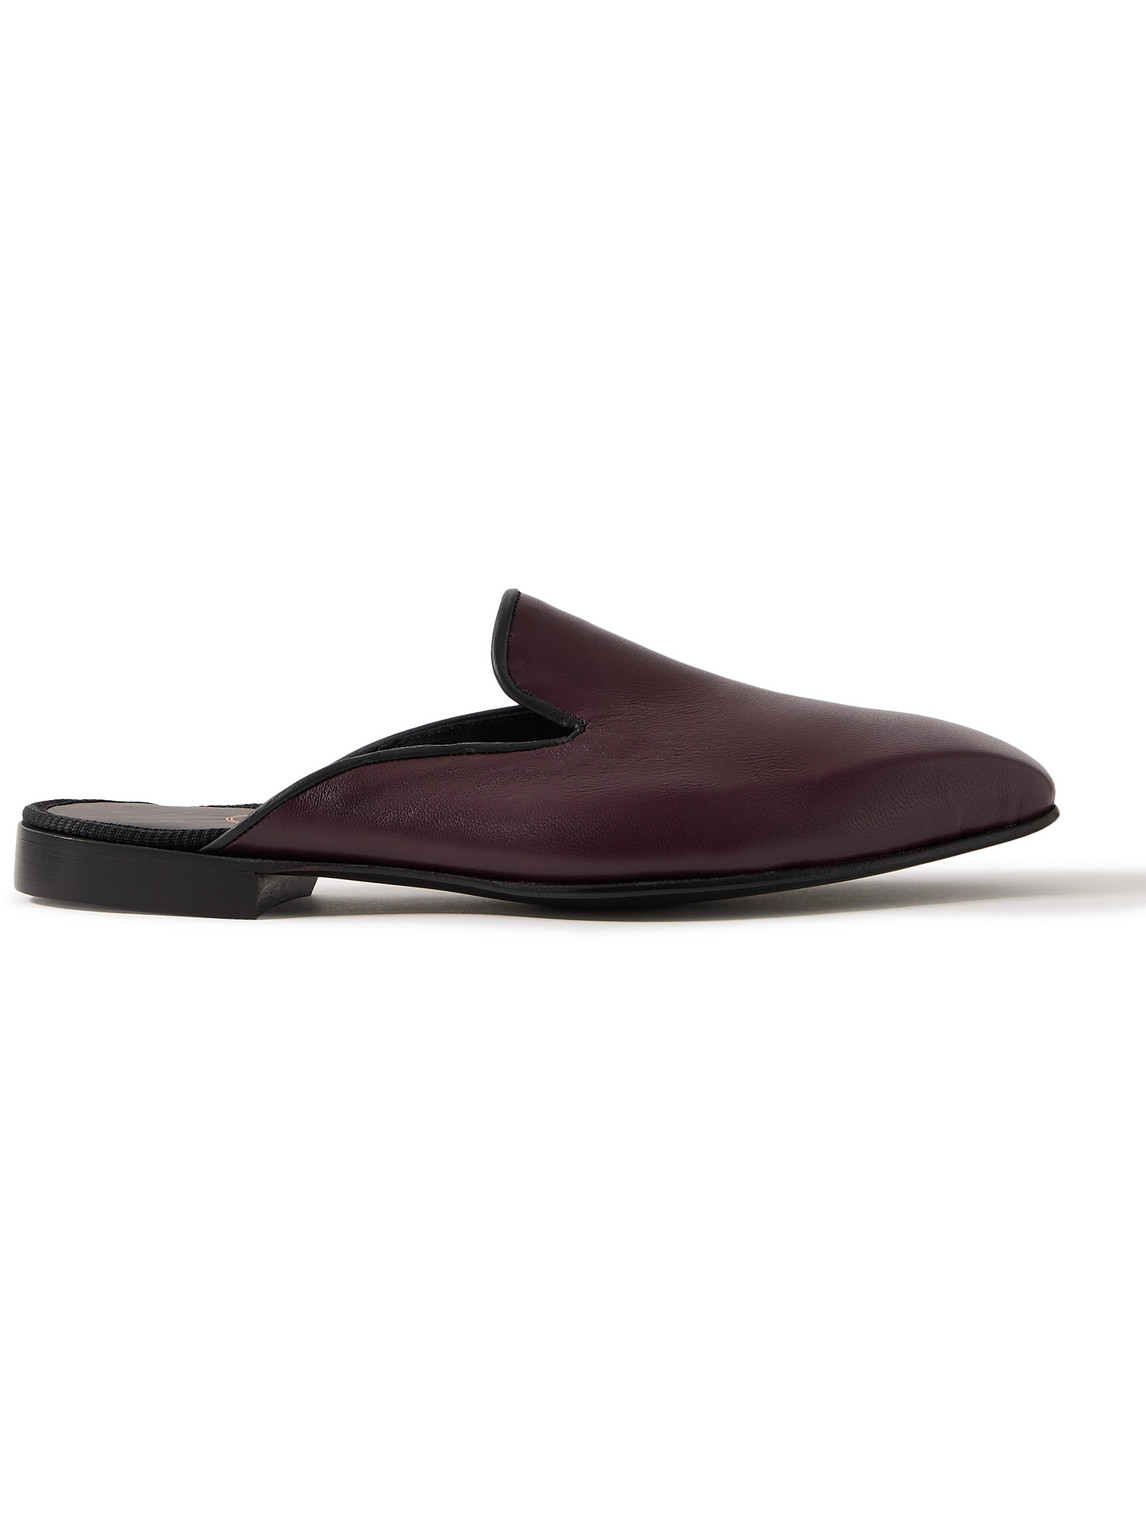 George Cleverley - Leather Backless Loafers - Men - Purple - UK 11 von George Cleverley